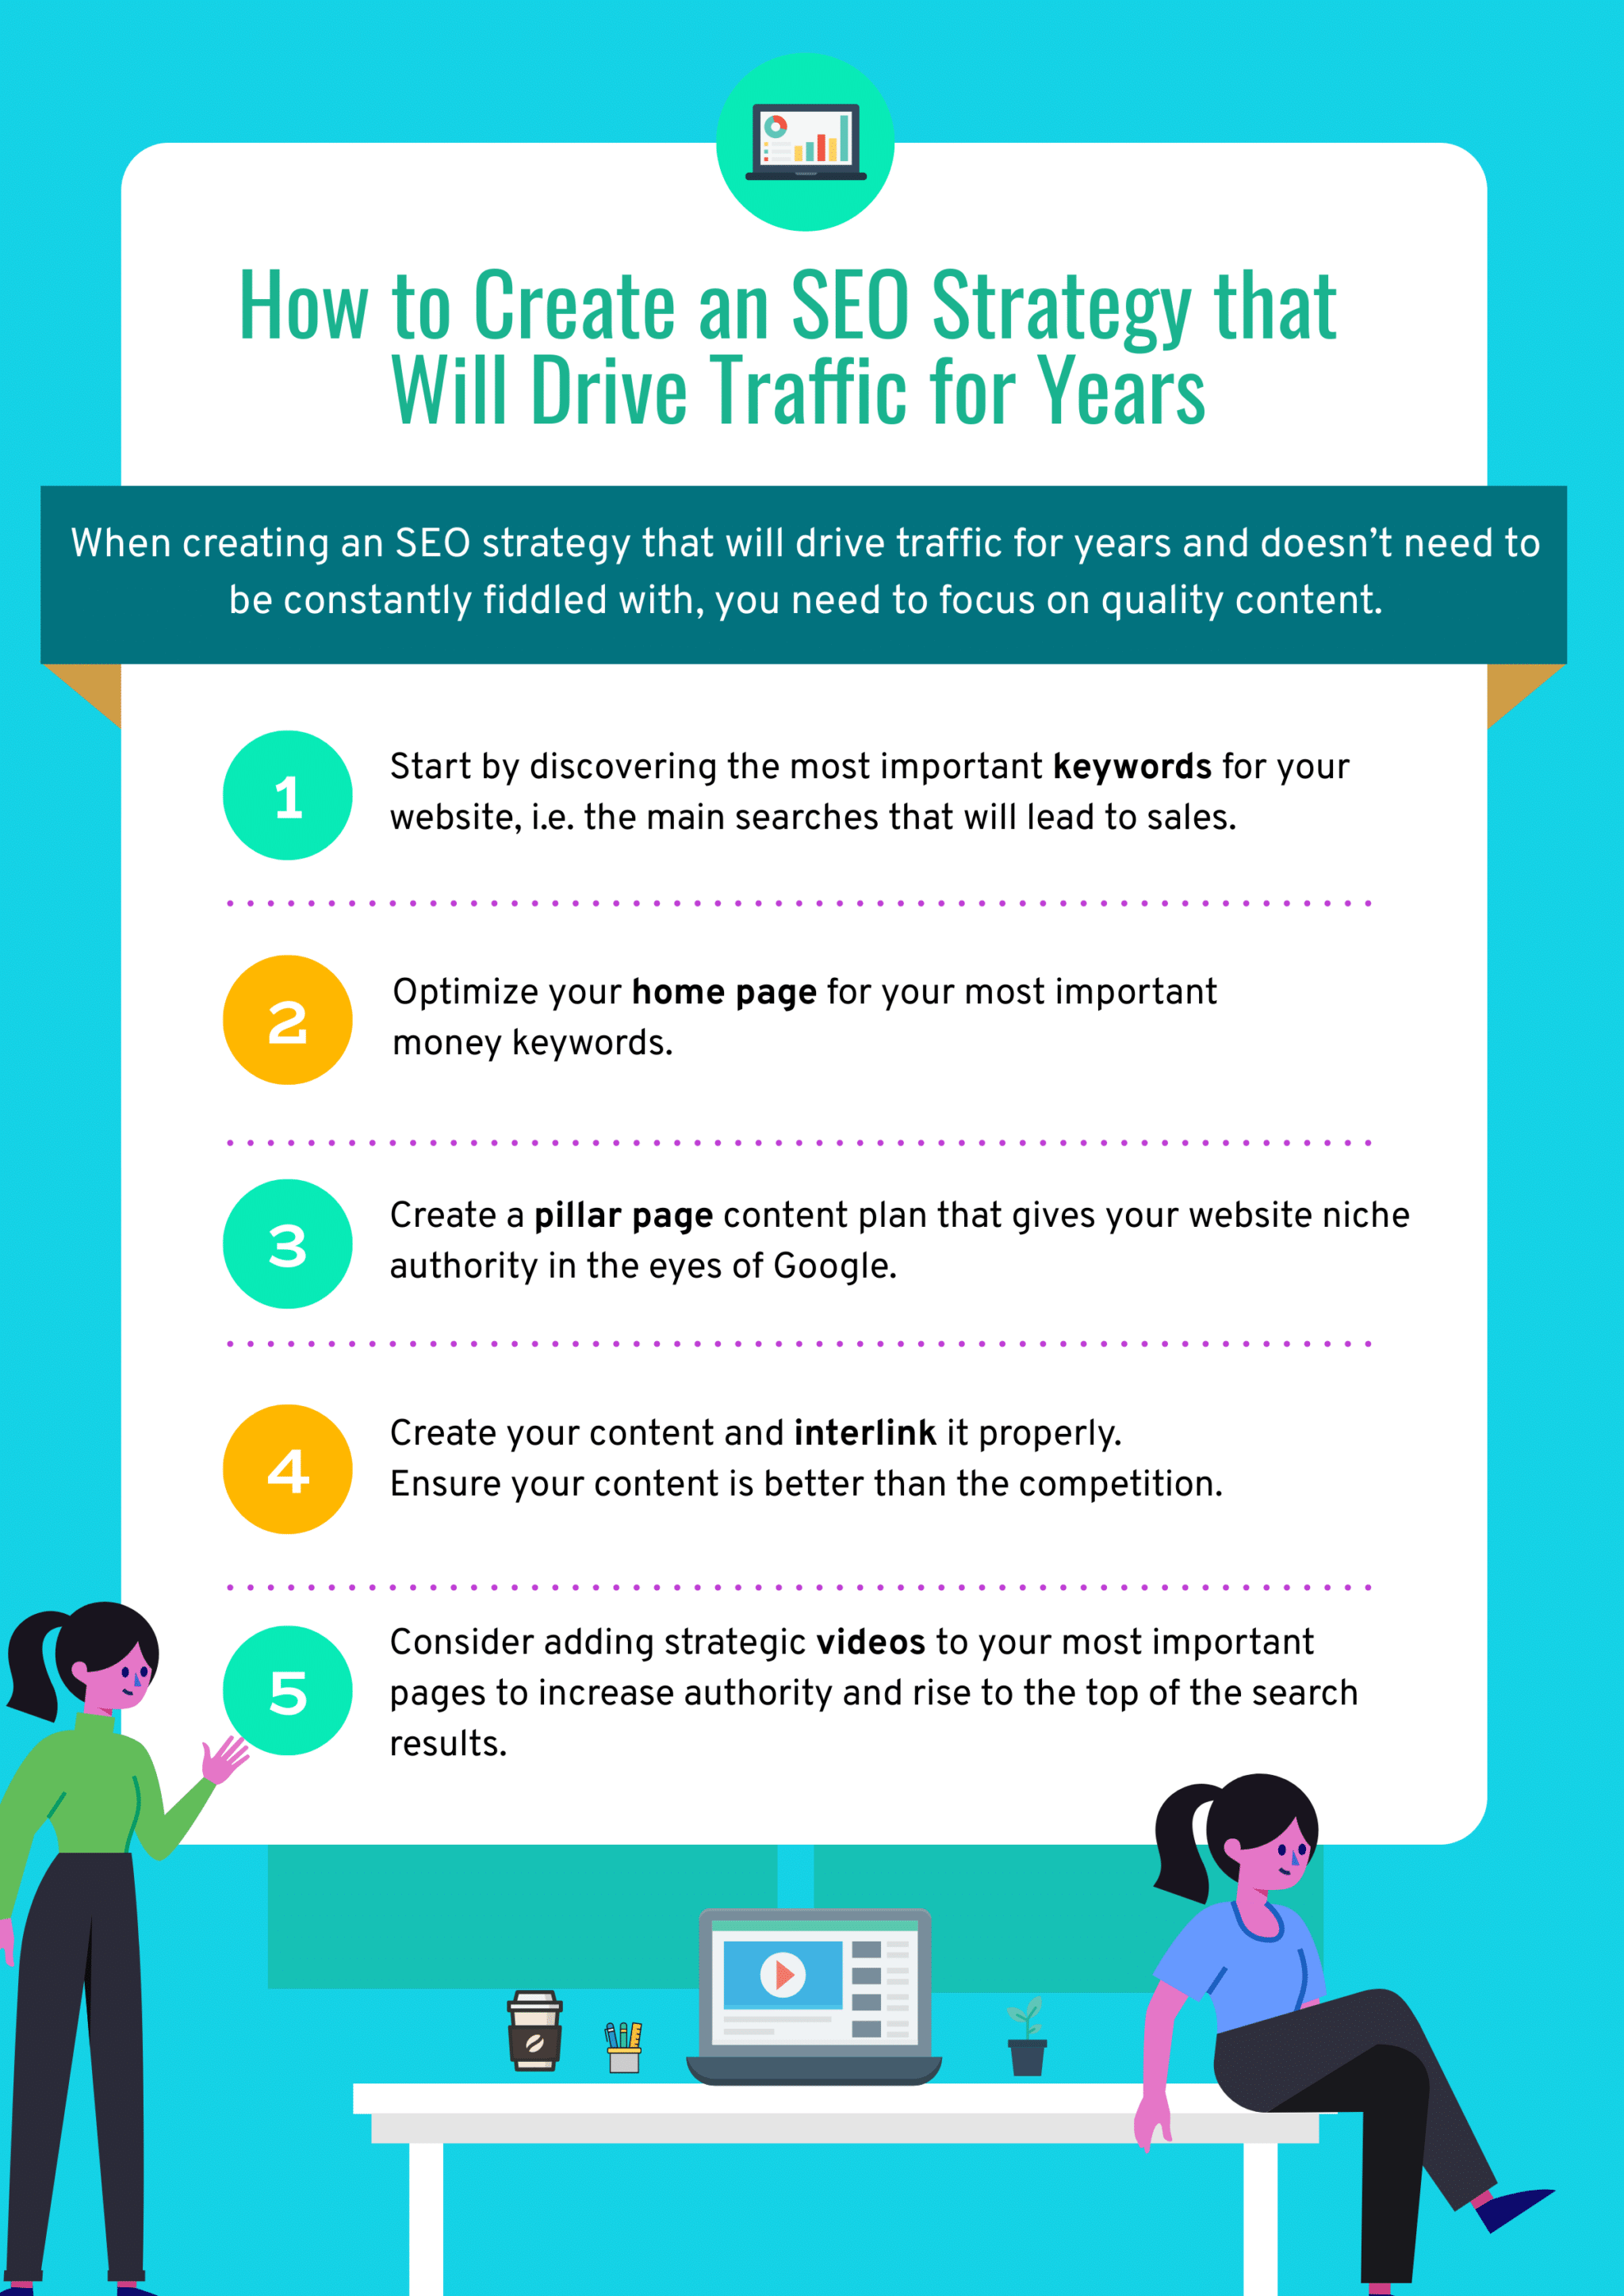 SEO Strategy that will drive traffic for years